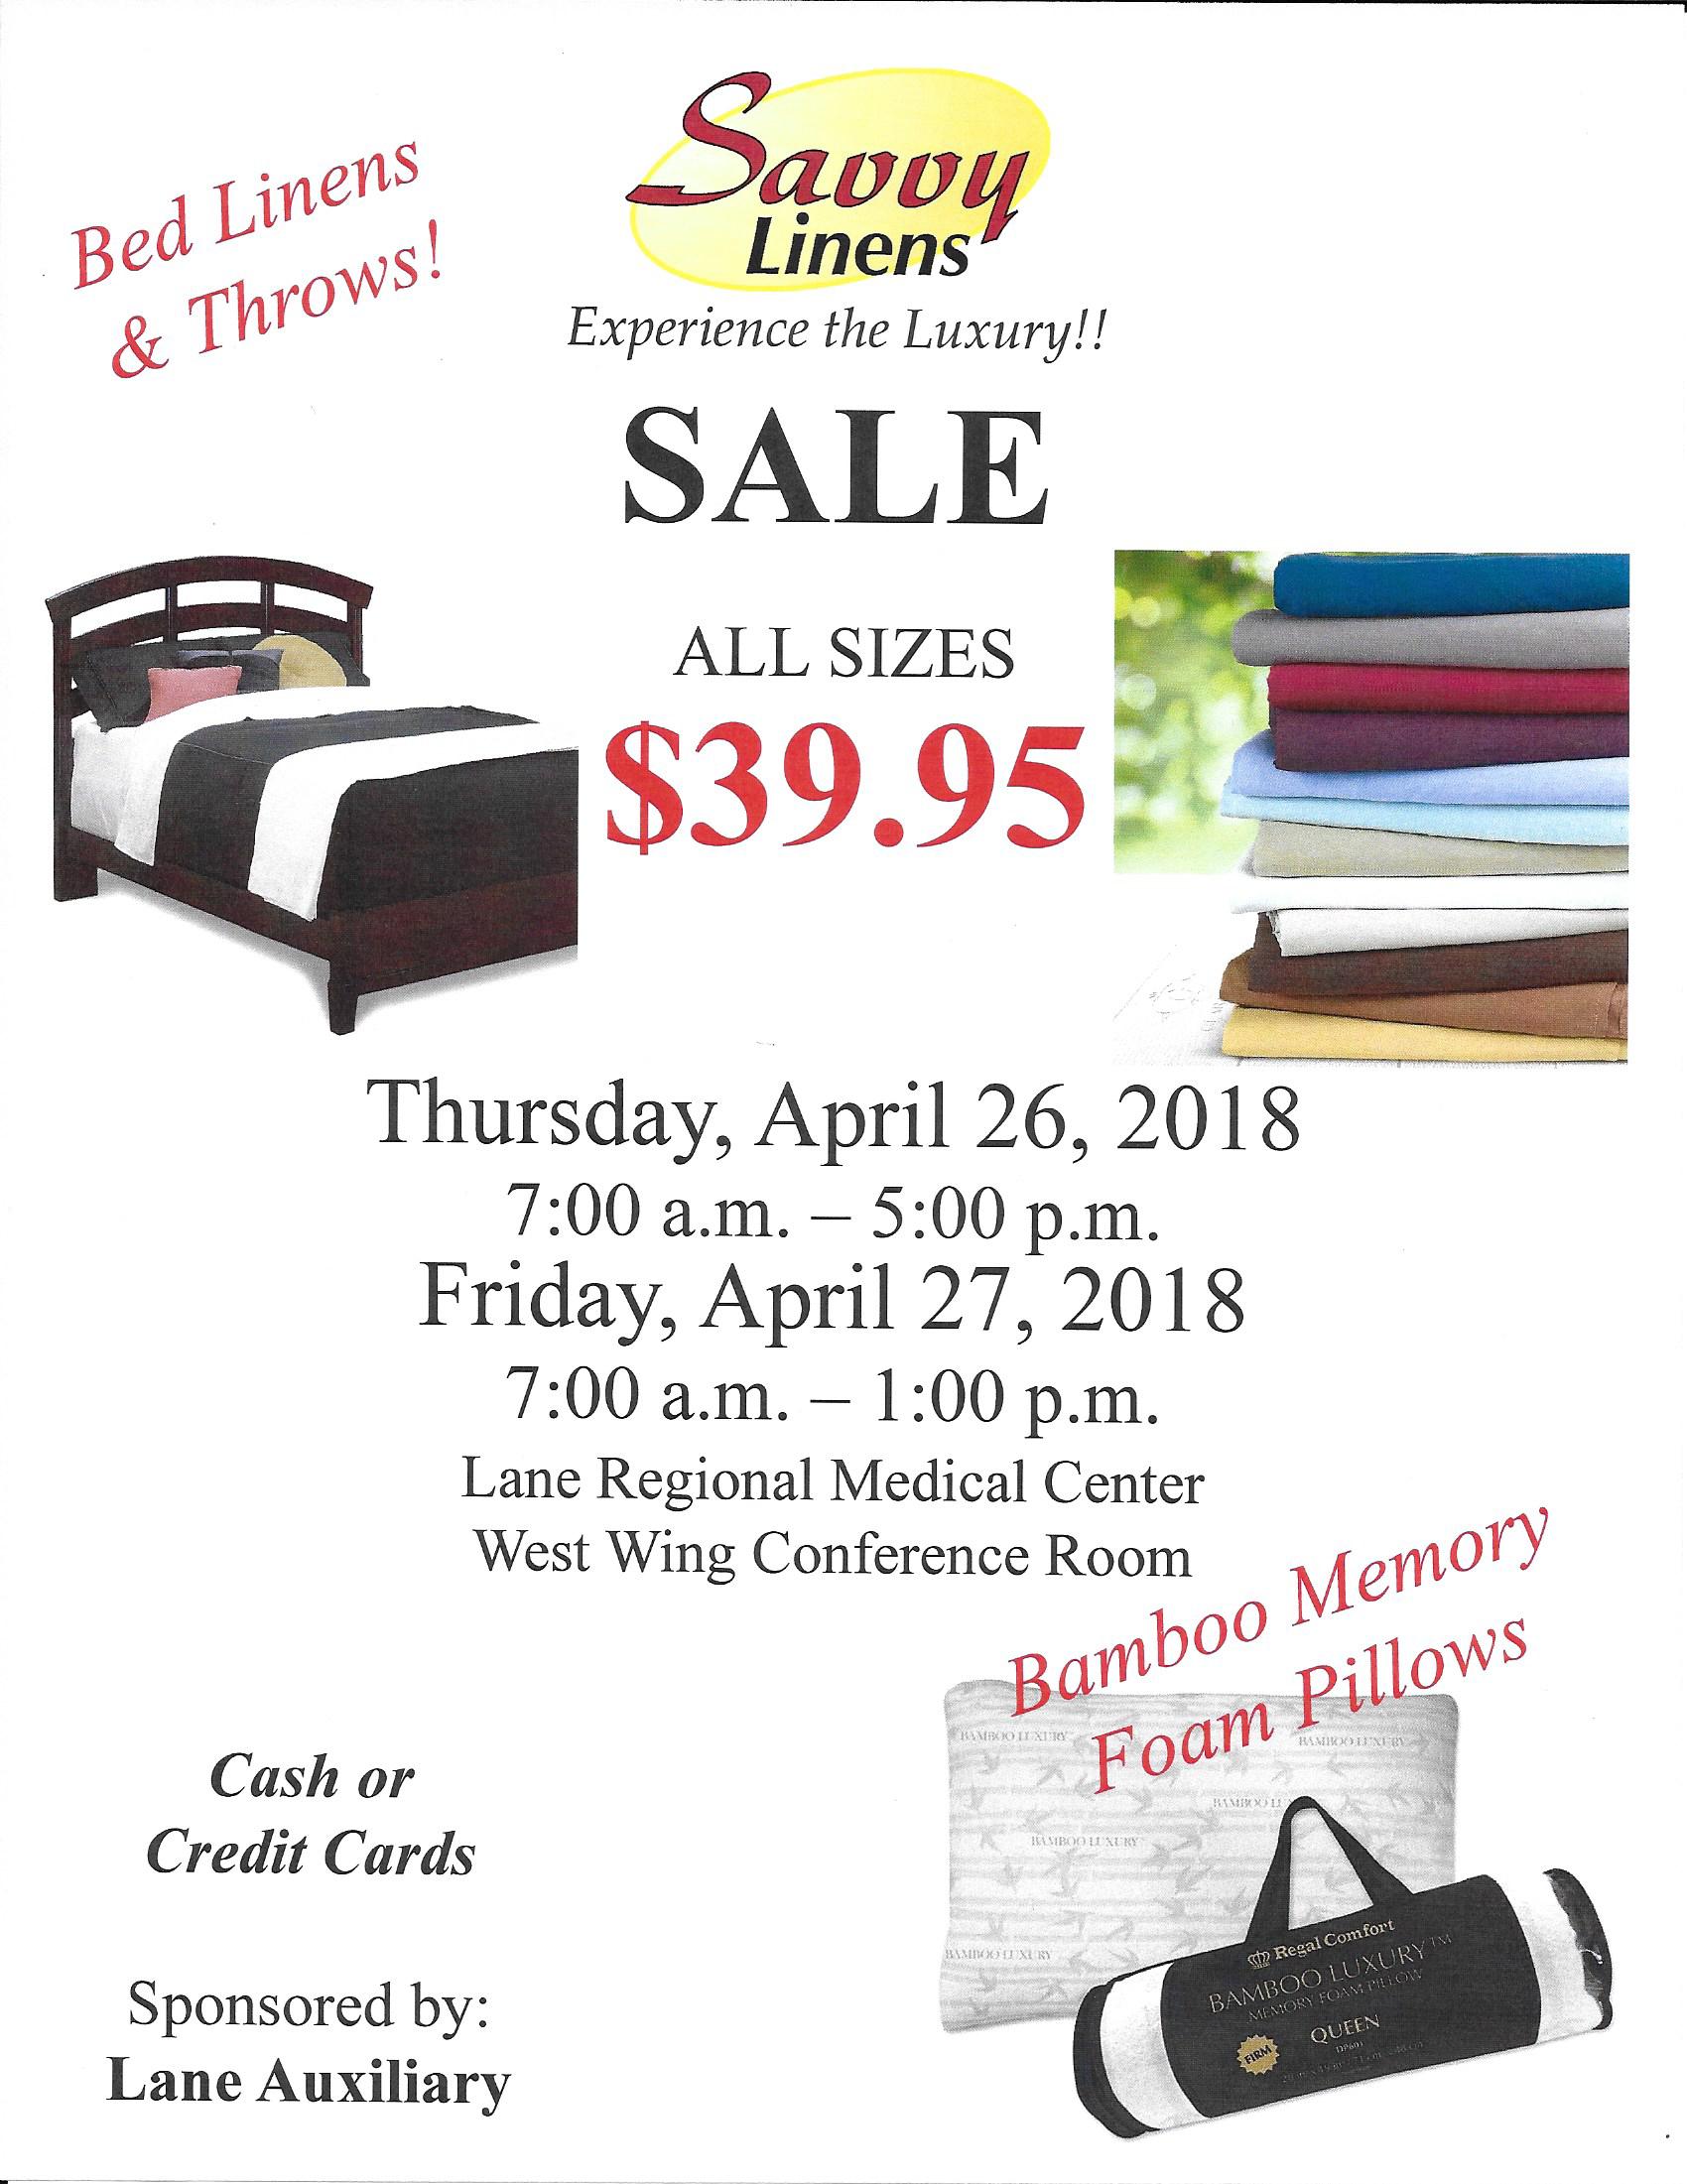 Lane Auxiliary to host "Savvy" Linen Sale